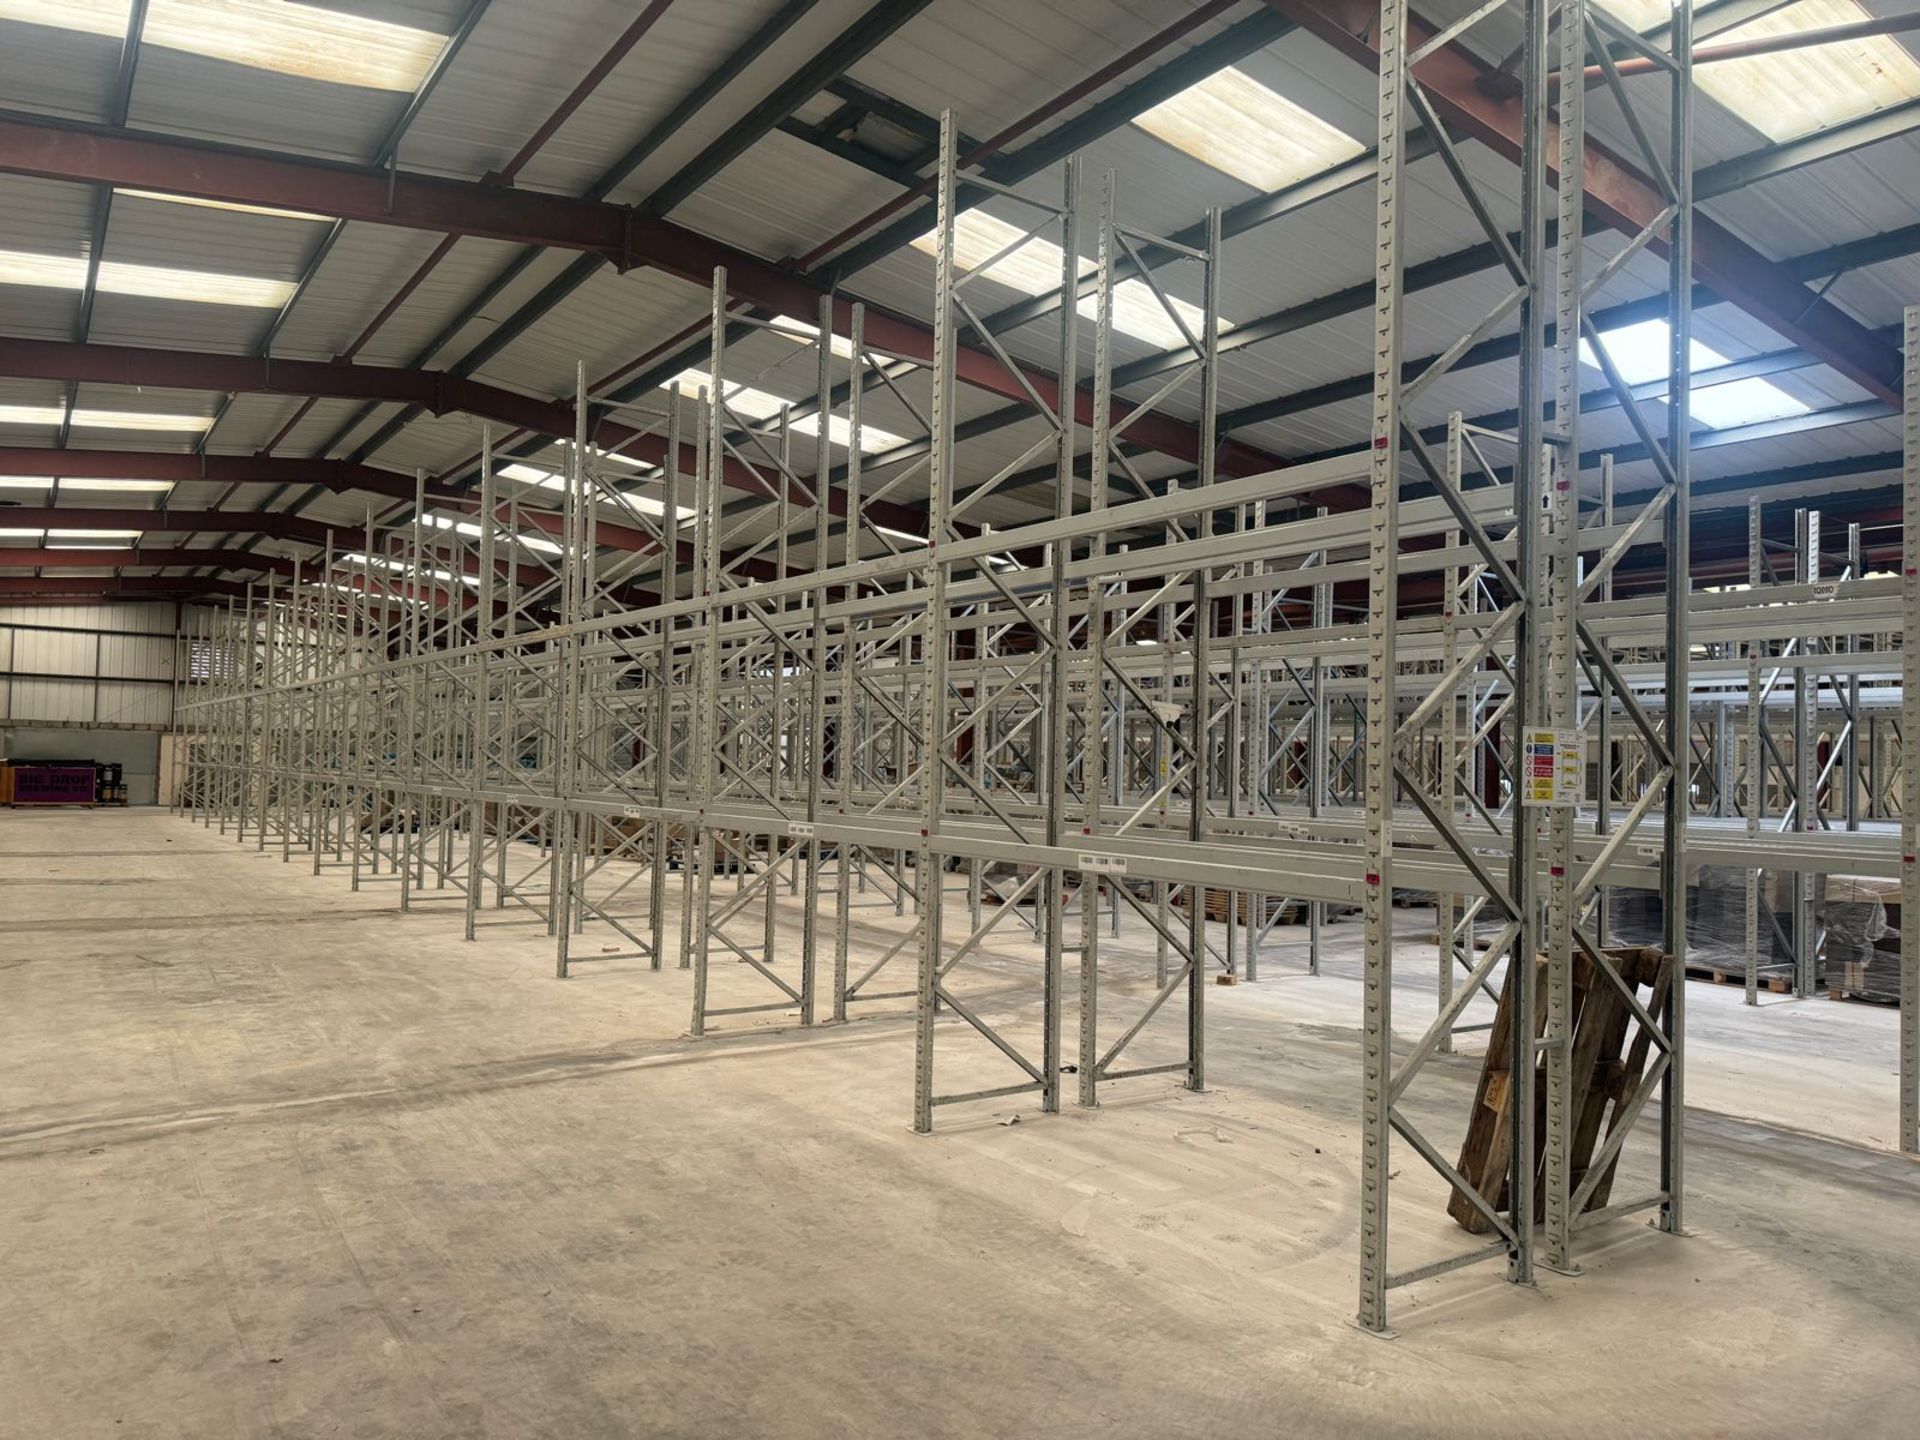 15 x Bays of Apex UK 8 Industrial Boltless Pallet Racking - Installed May 2023